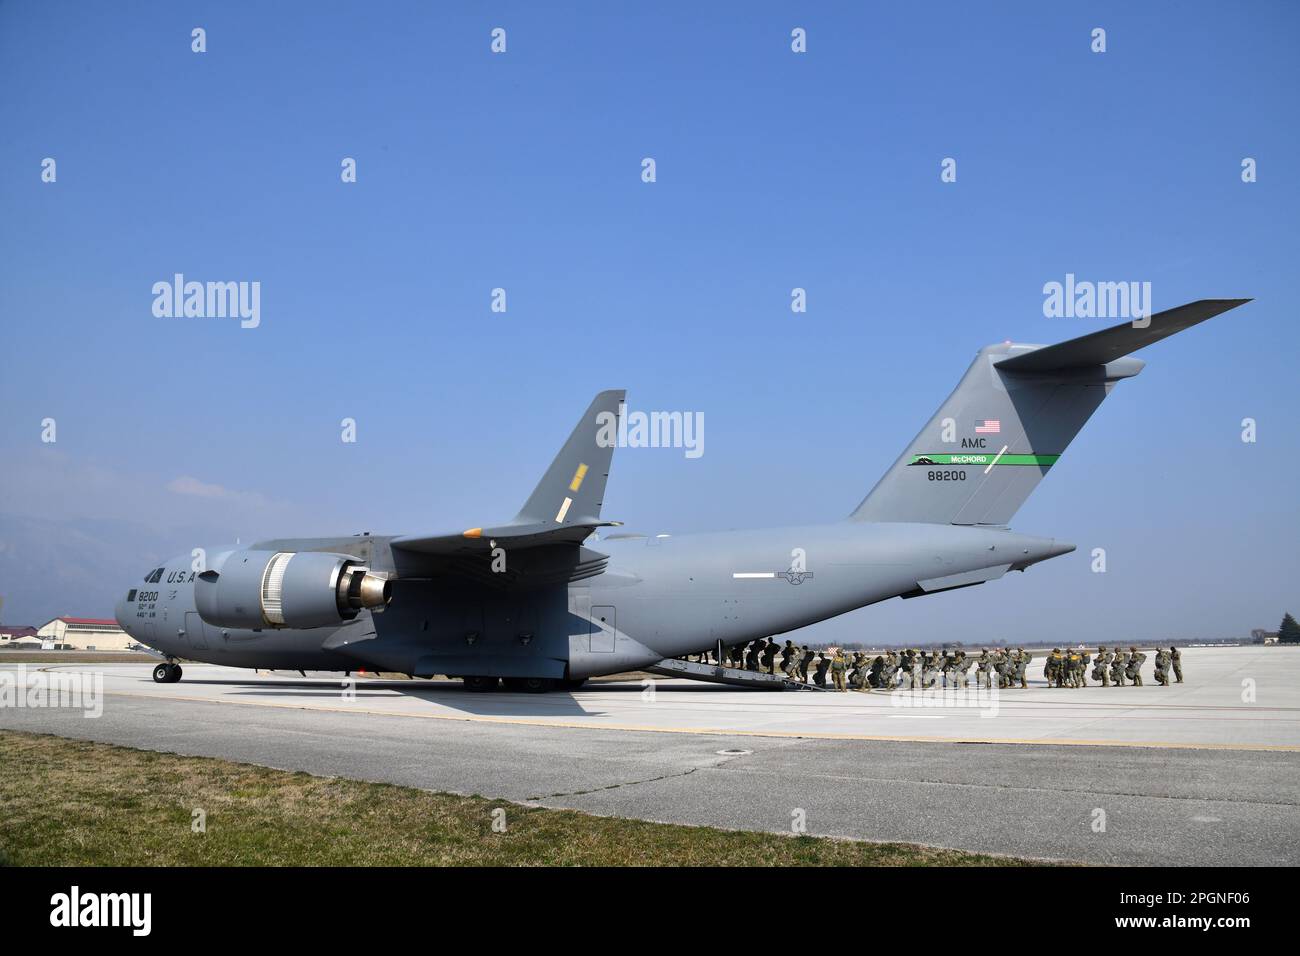 US Army Paratroopers assigned to 2nd Battalion, 503rd Parachute Infantry Regiment, 173rd Airborne Brigade, load a C-17 from 446th Airlift Wing, in preparation for an airborne operation in commemoration of the 20th anniversary of Operation Northern Delay at Aviano Air Base, Italy on March 22, 2023. Operation Northern Delay occurred on 26 March 2003 as part of the 2003 invasion of Iraq. It involved dropping 1,000 paratroopers from the 173rd Airborne Brigade into Northern Iraq. It was the last large-scale combat parachute operation conducted by the U.S. military since Operation Just Cause. The op Stock Photo